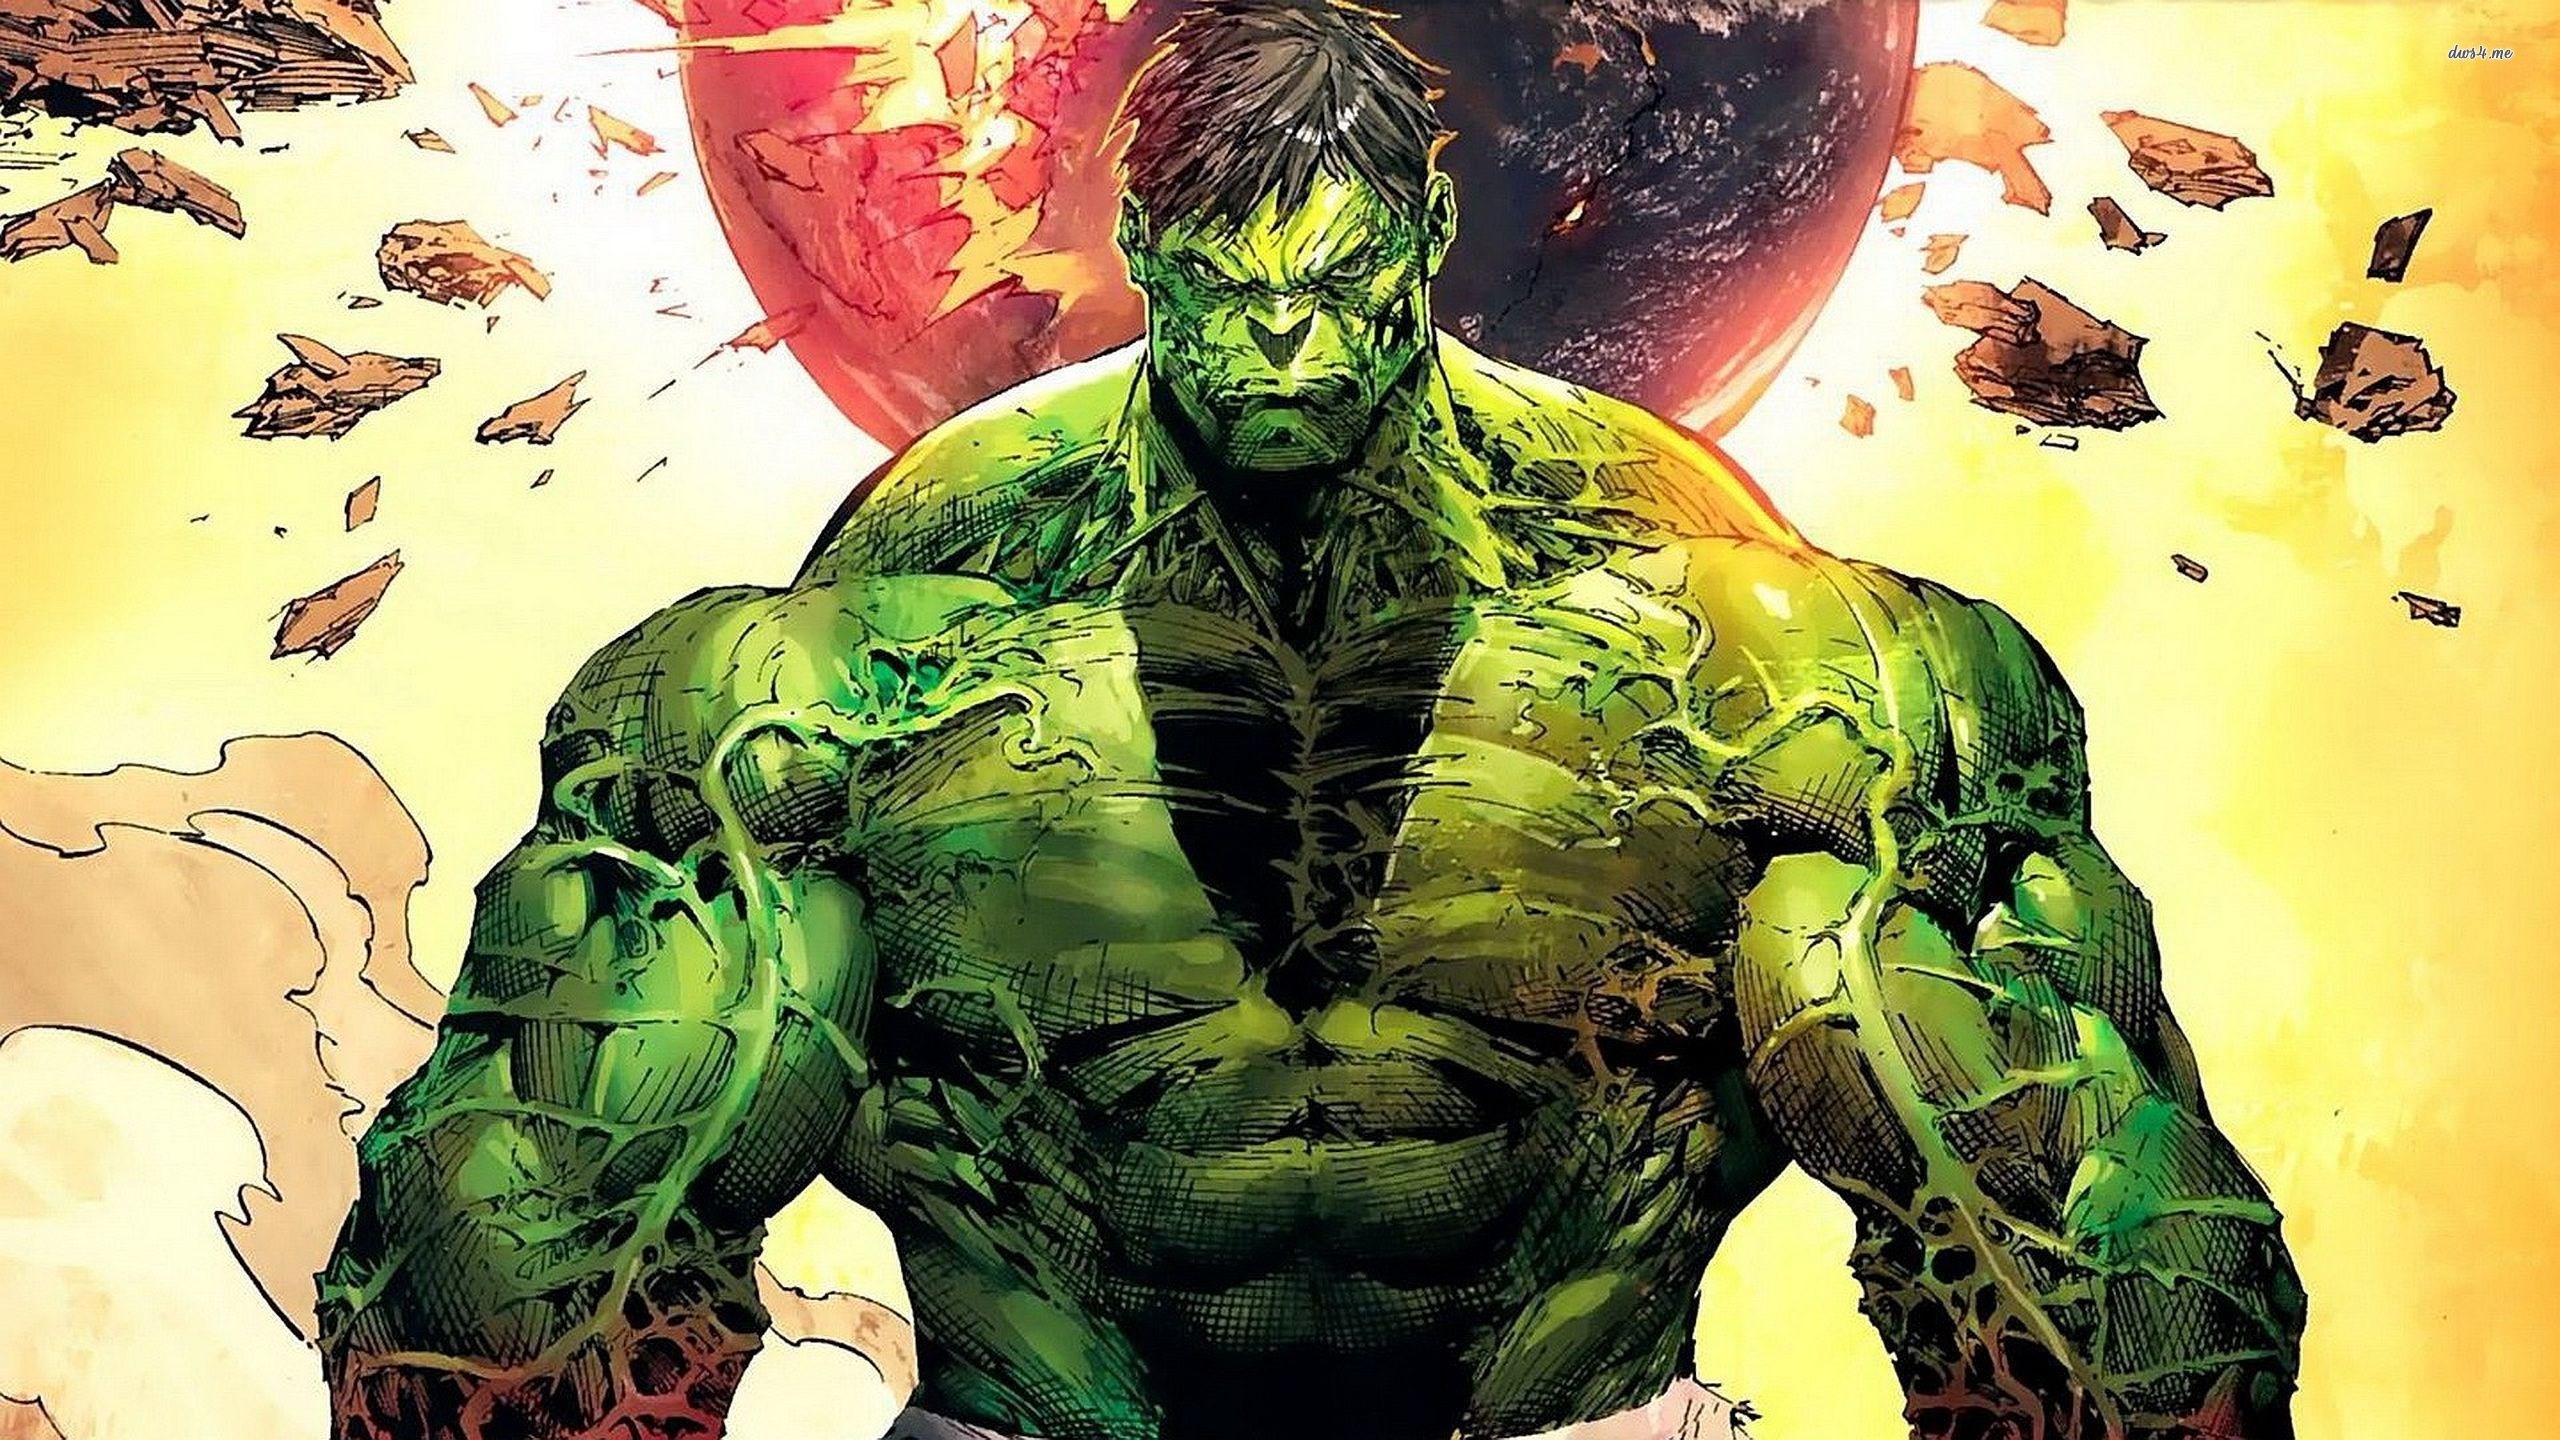 2560x1440 hulk pictures to download, 857 kB - Halen Holiday